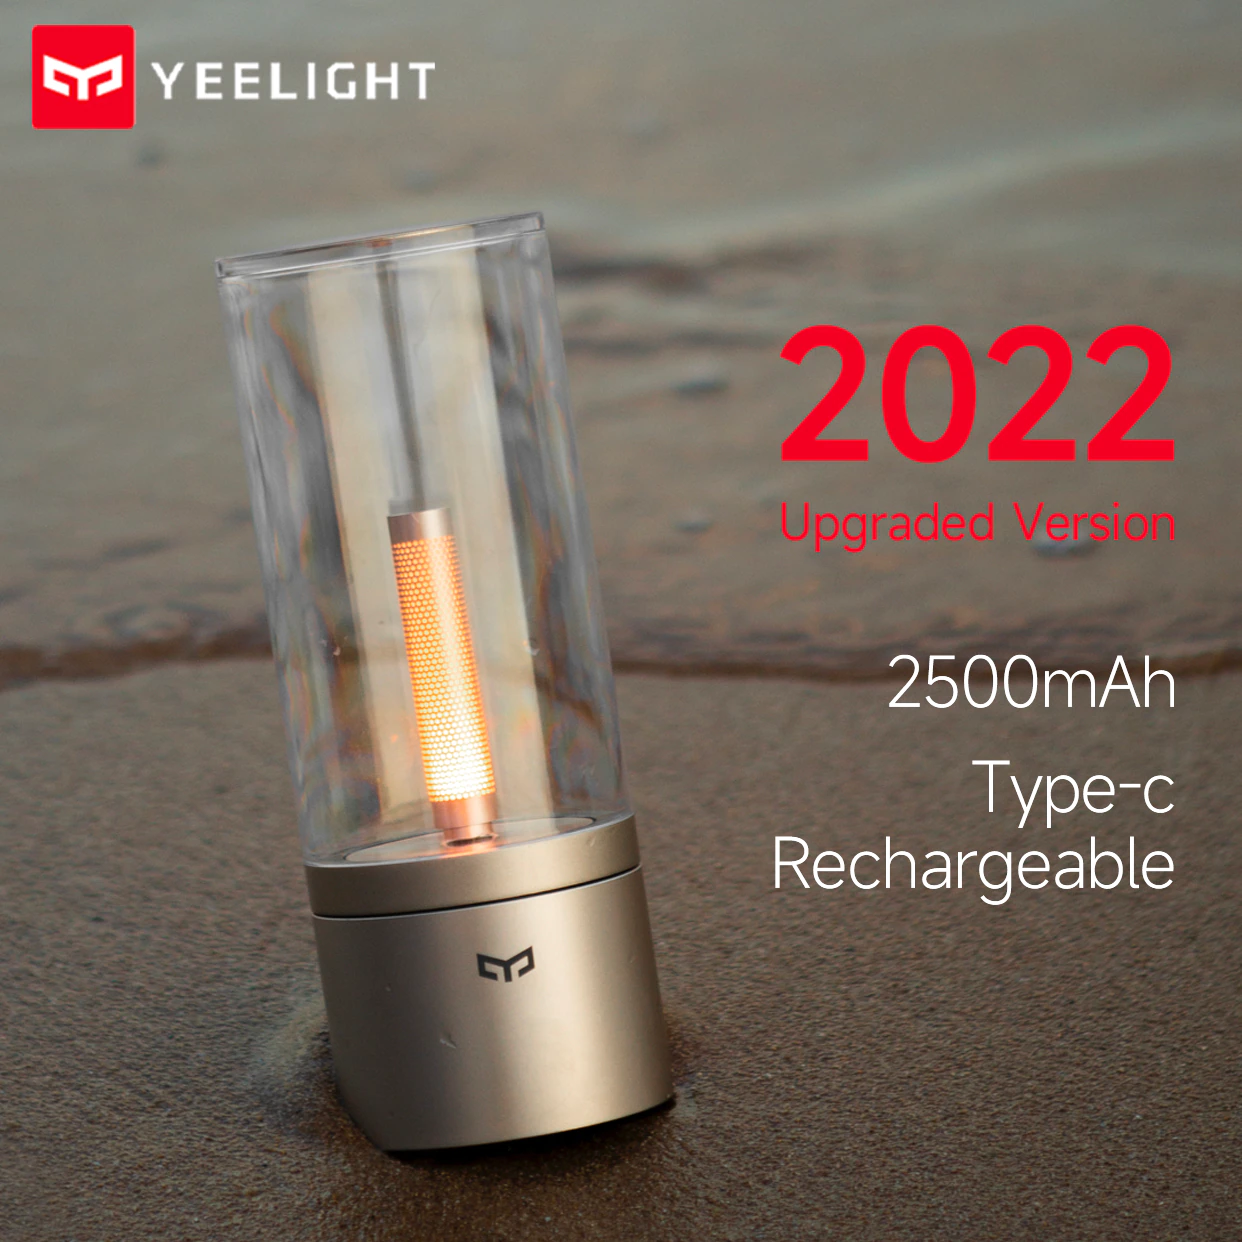 2022 New Yeelight Candela lamp Led Night ight rotate to meet the right mood candle-like breathing light stepless dimming -A1Smartshop